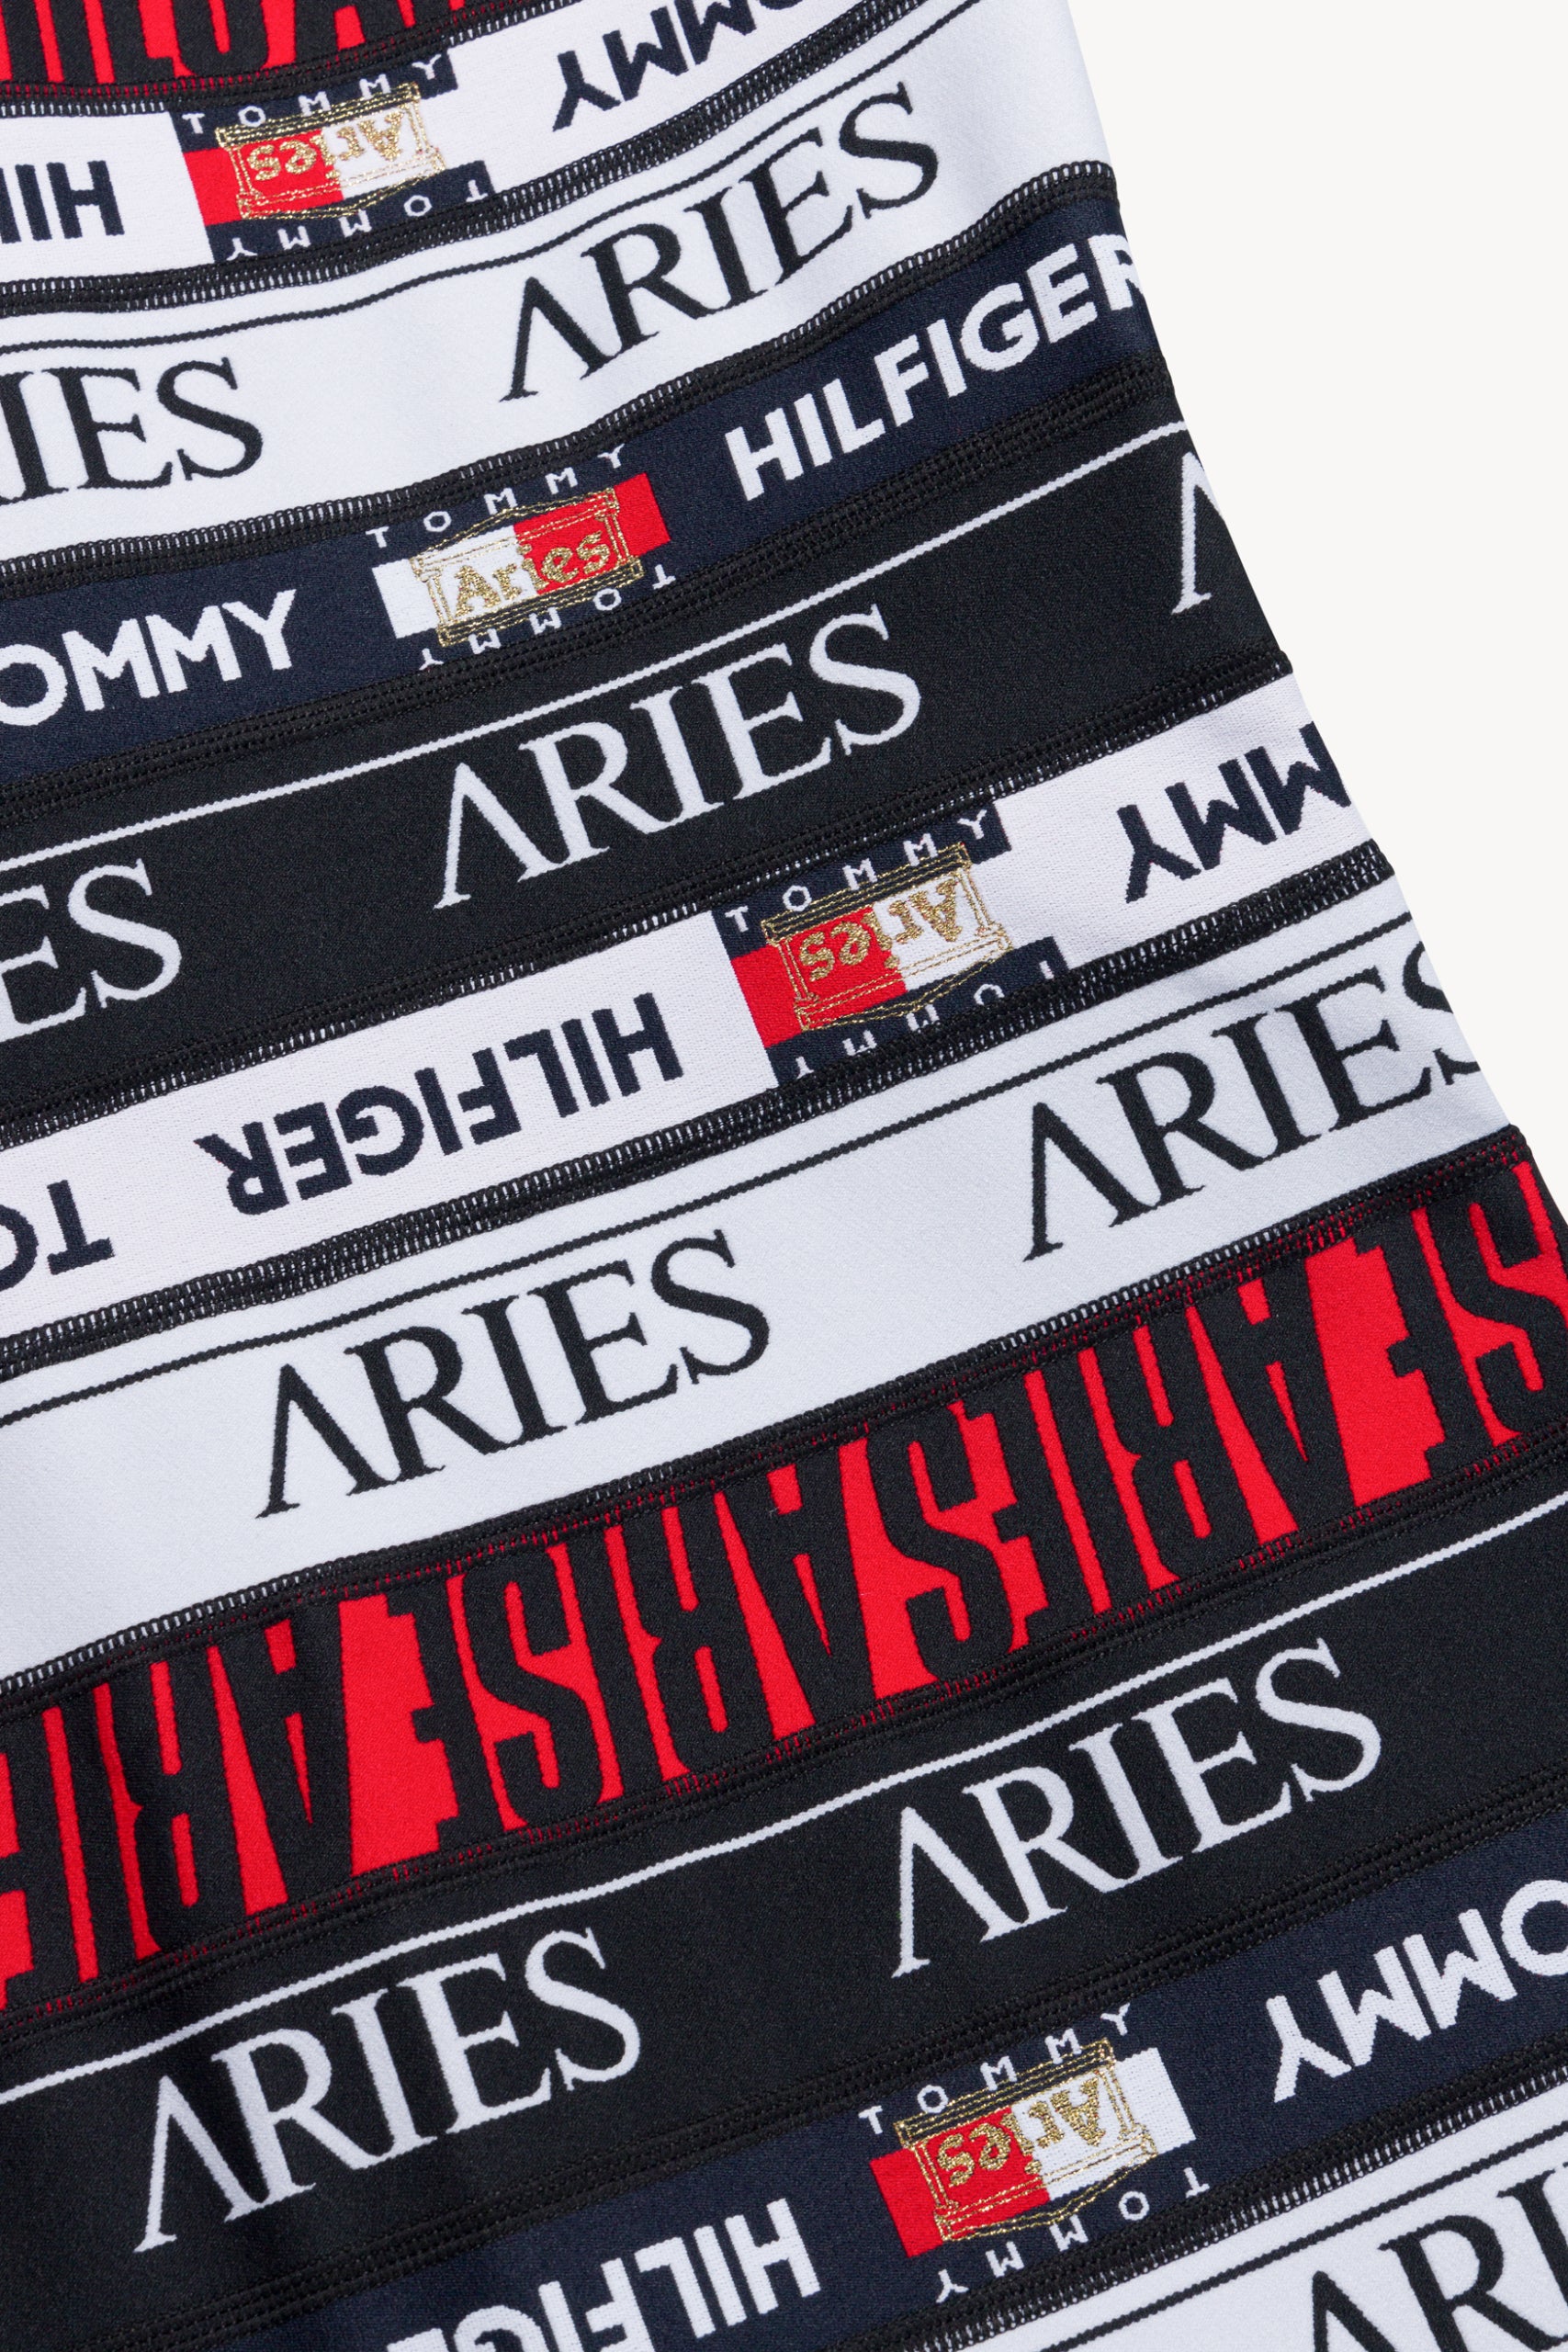 Load image into Gallery viewer, Tommy x Aries Logo Elastic Dress